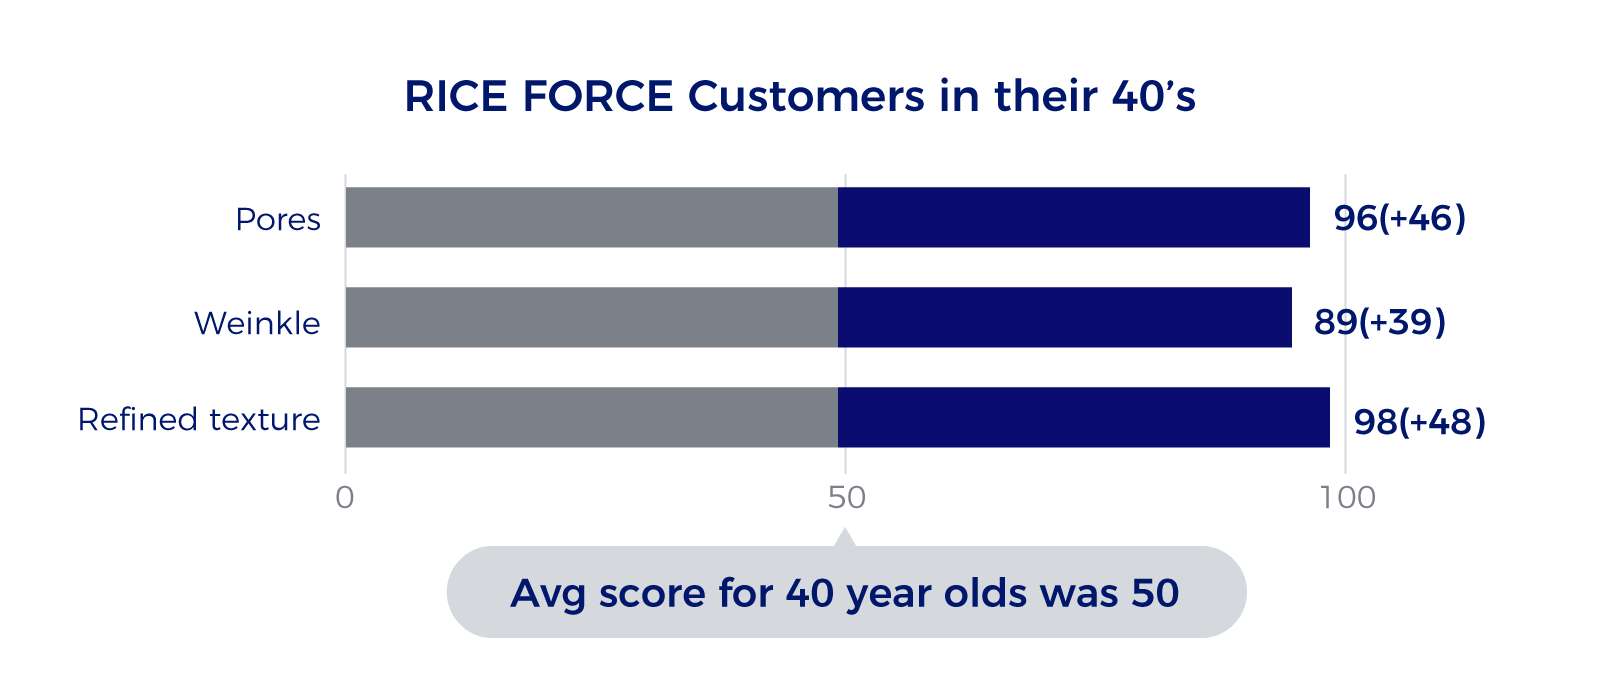 RICE FORCE Customers in their 40’s